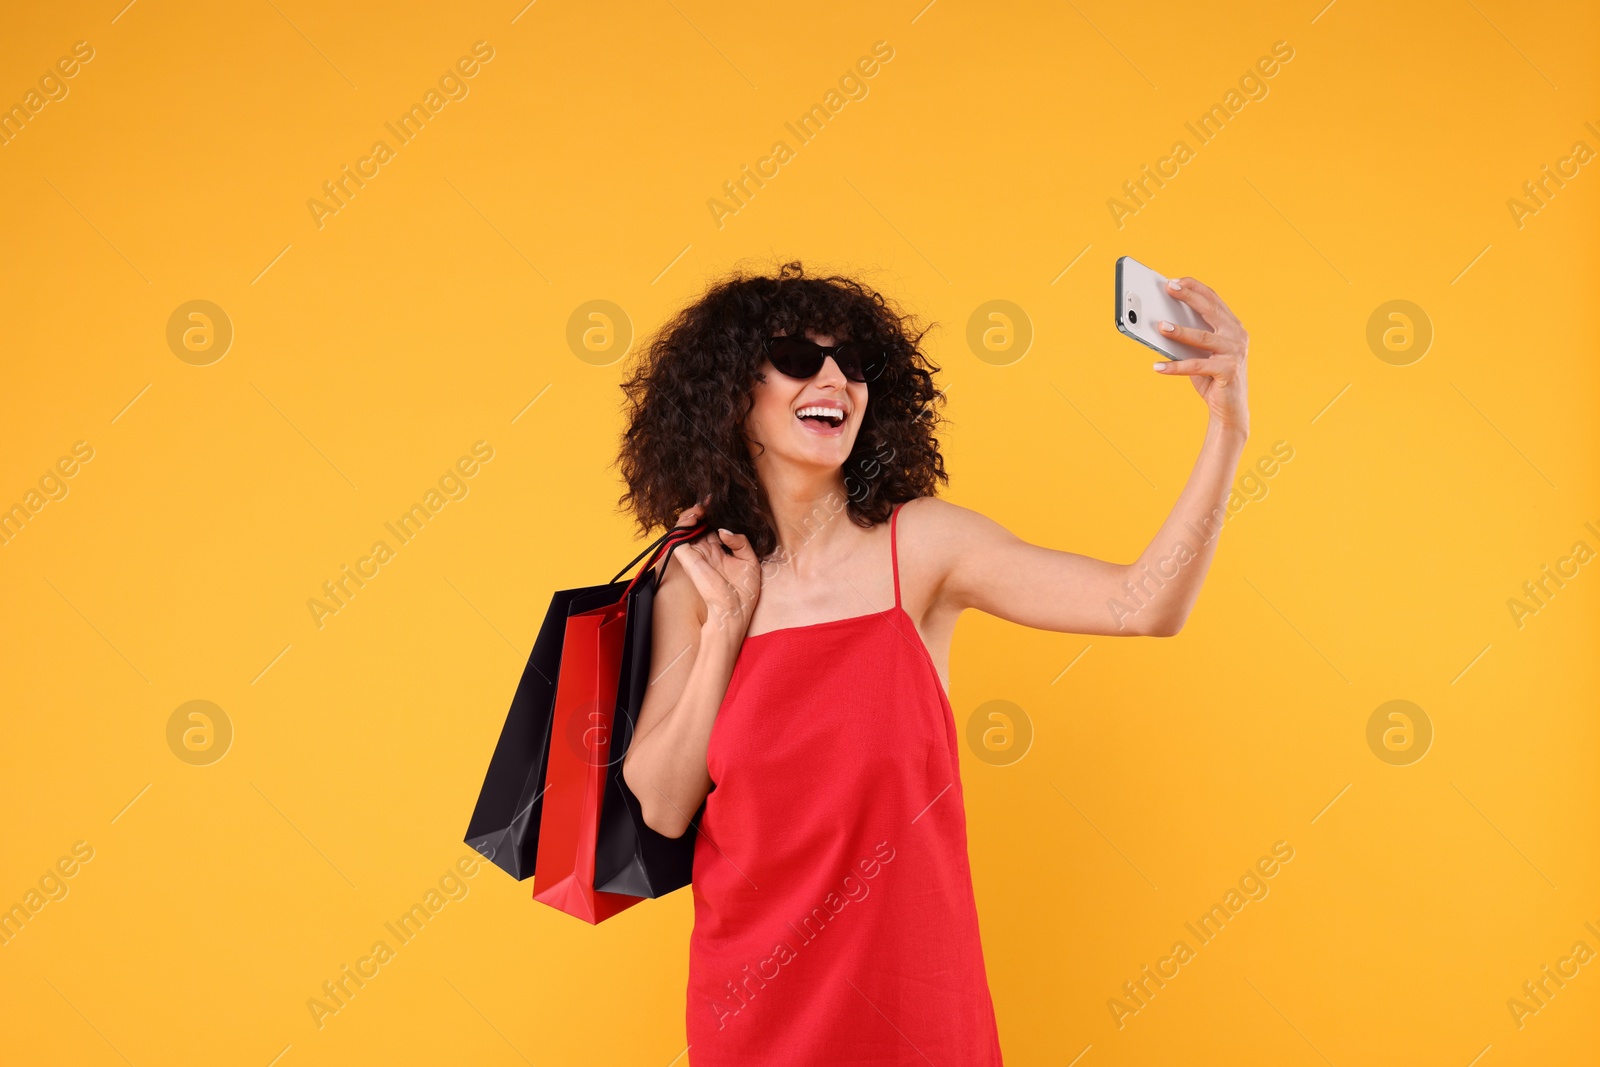 Photo of Happy young woman with shopping bags and stylish sunglasses taking selfie on yellow background